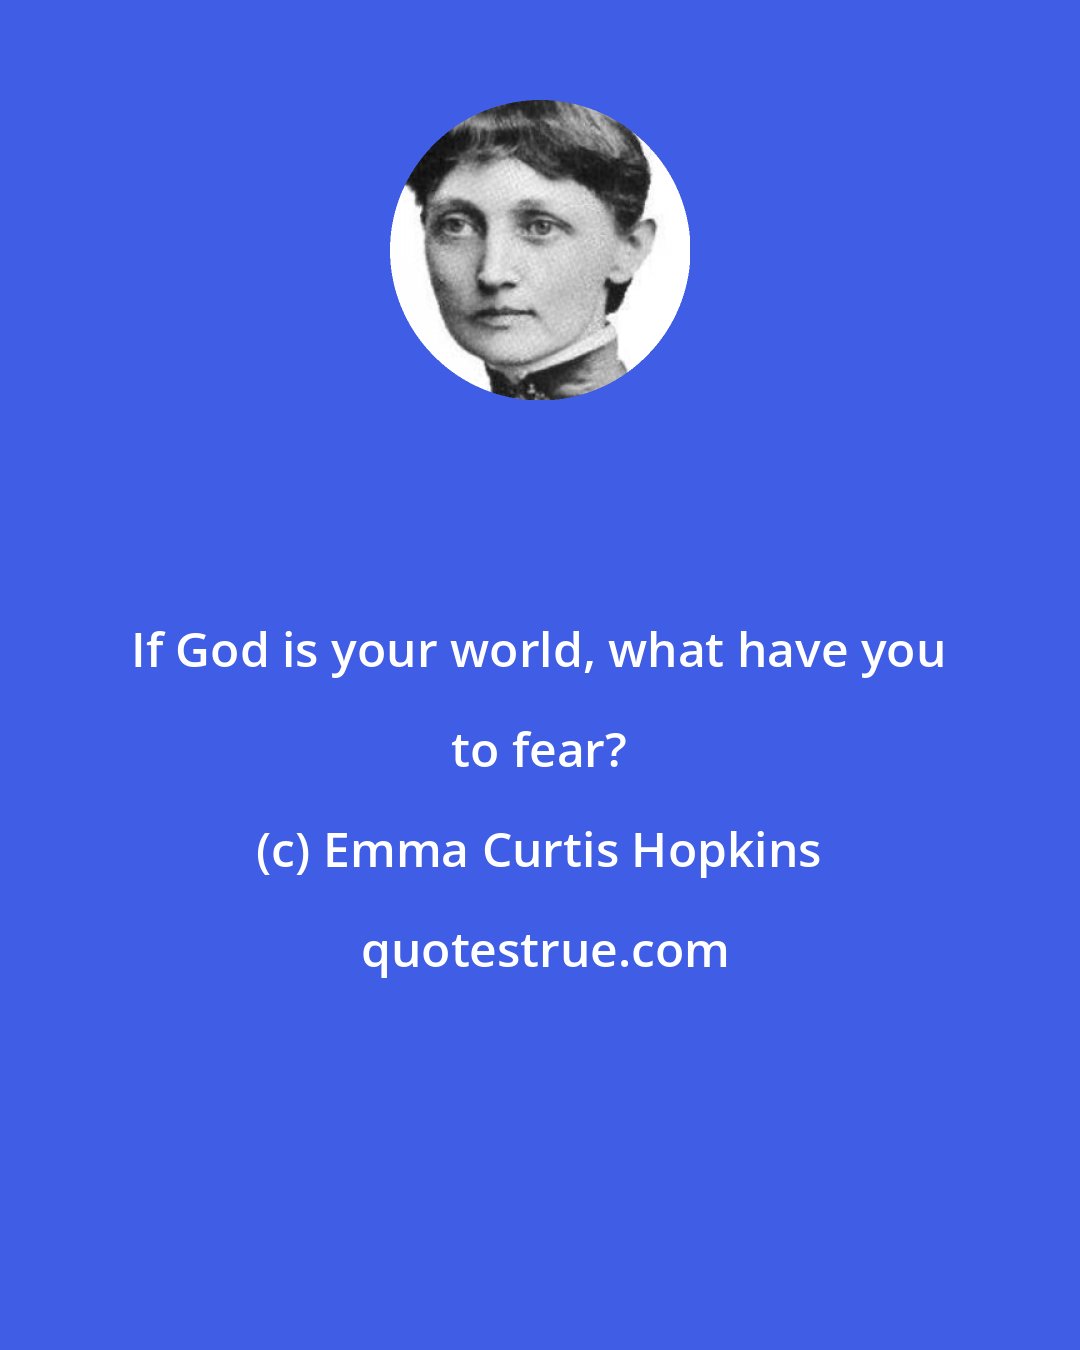 Emma Curtis Hopkins: If God is your world, what have you to fear?